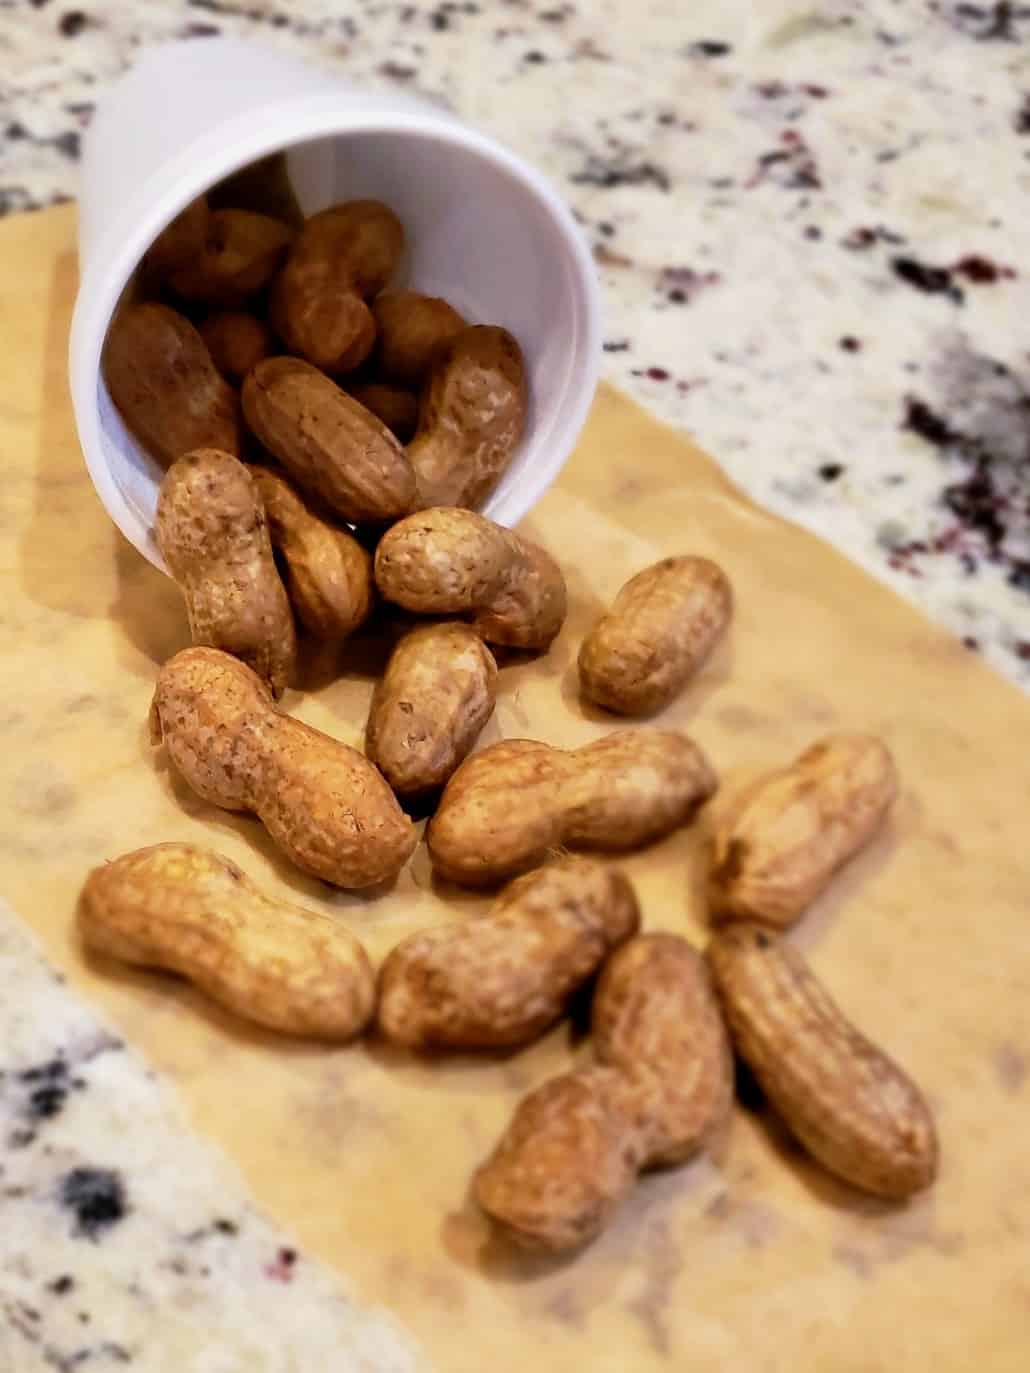 Boiled peanuts spilled out onto brown paper from a white styrofoam cup.